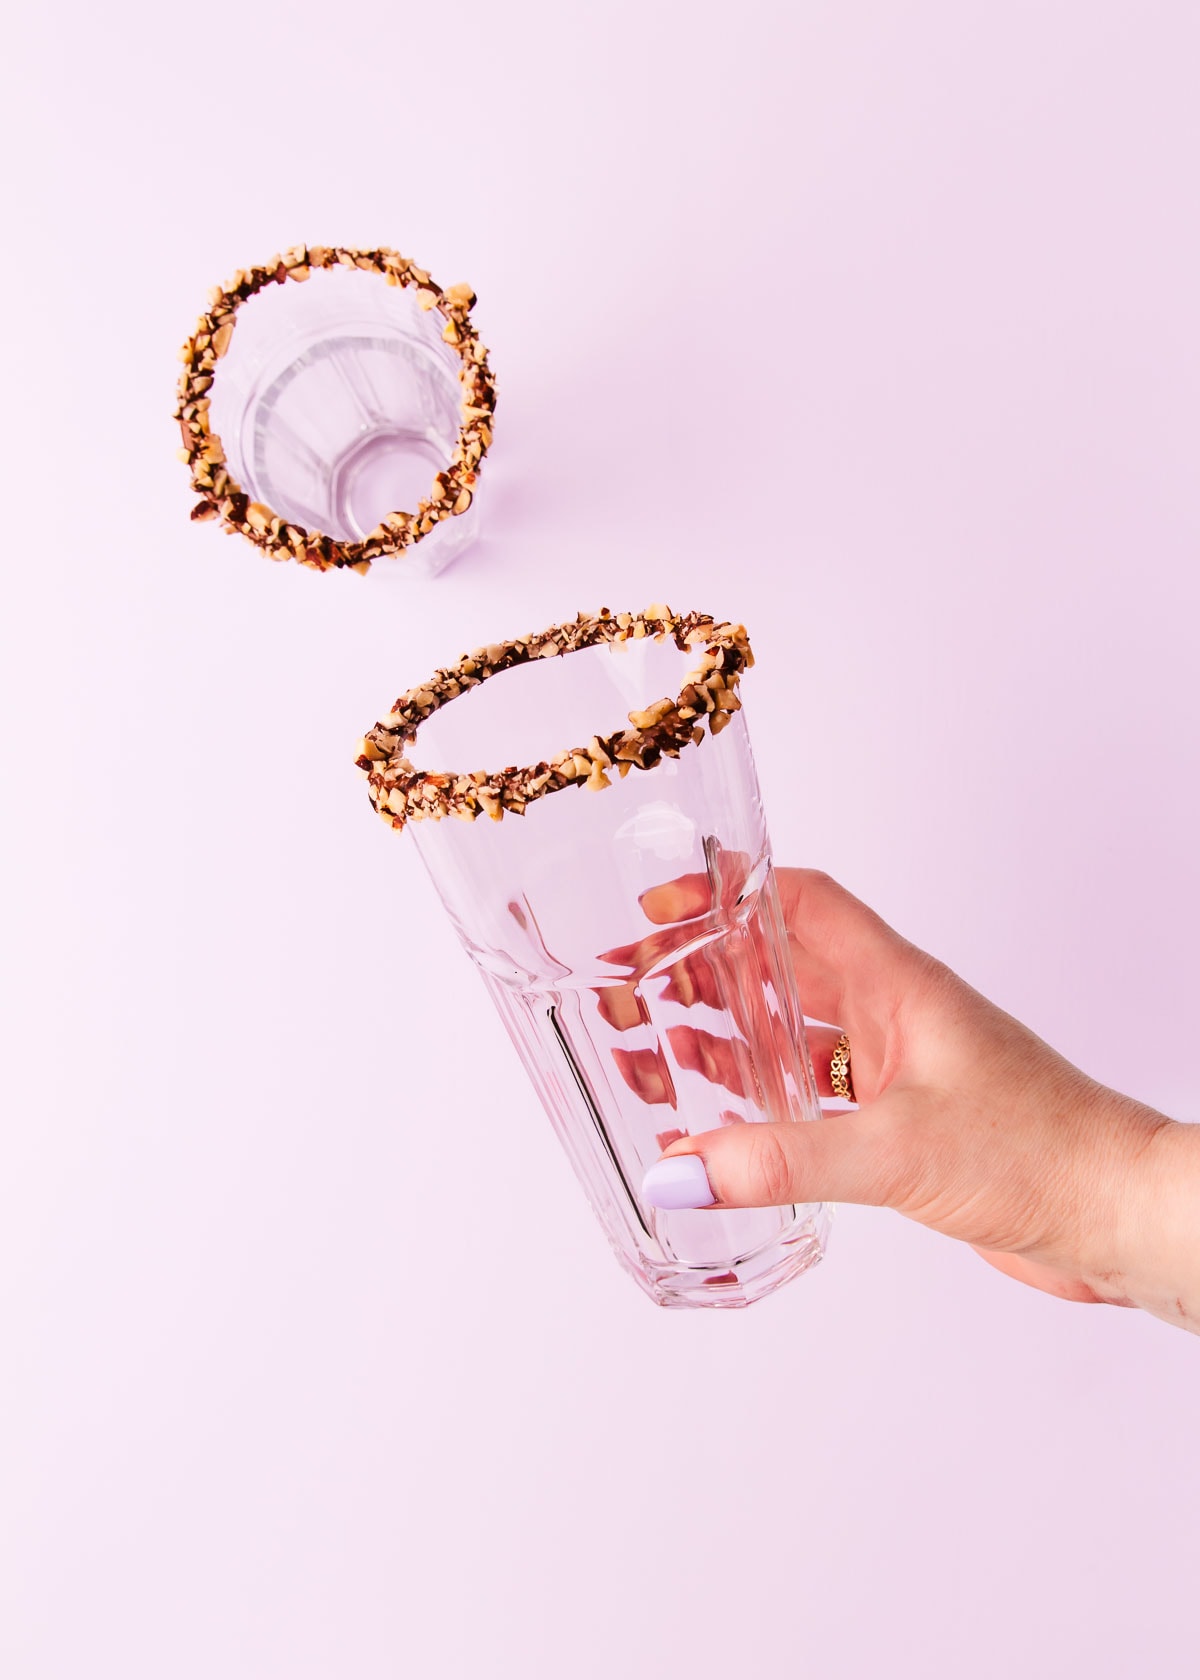 A hand holding a glass with a Nutella dipped rim covered in chopped hazelnuts.